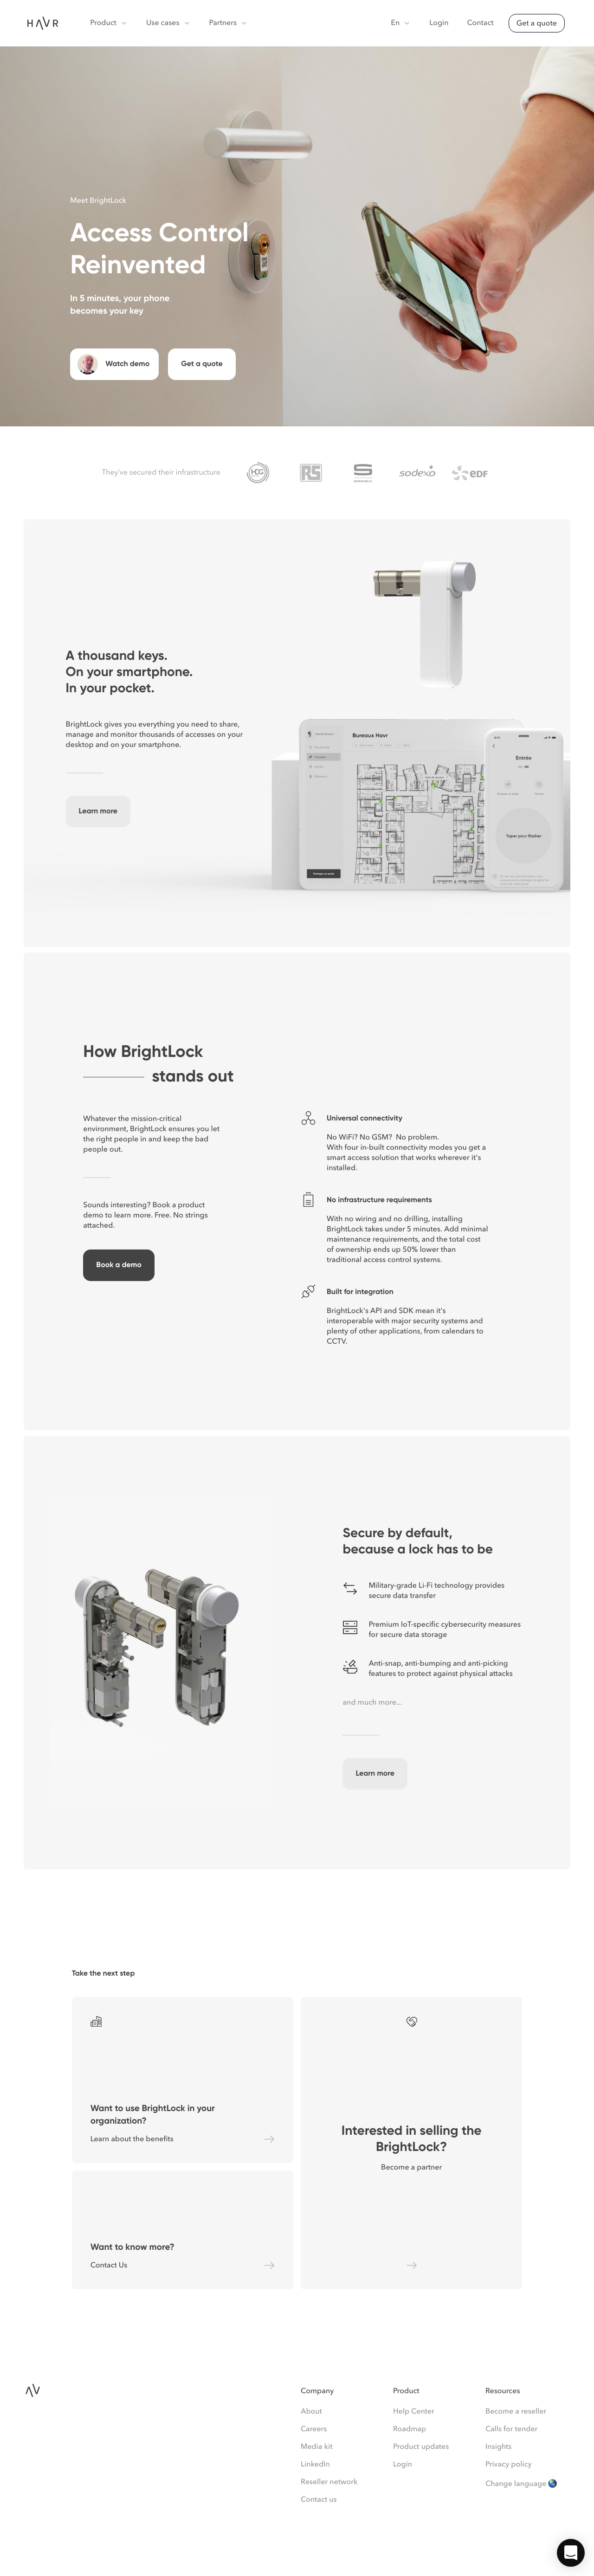 app landing page example of Meet BrightLock, LiFi-powered smart access control